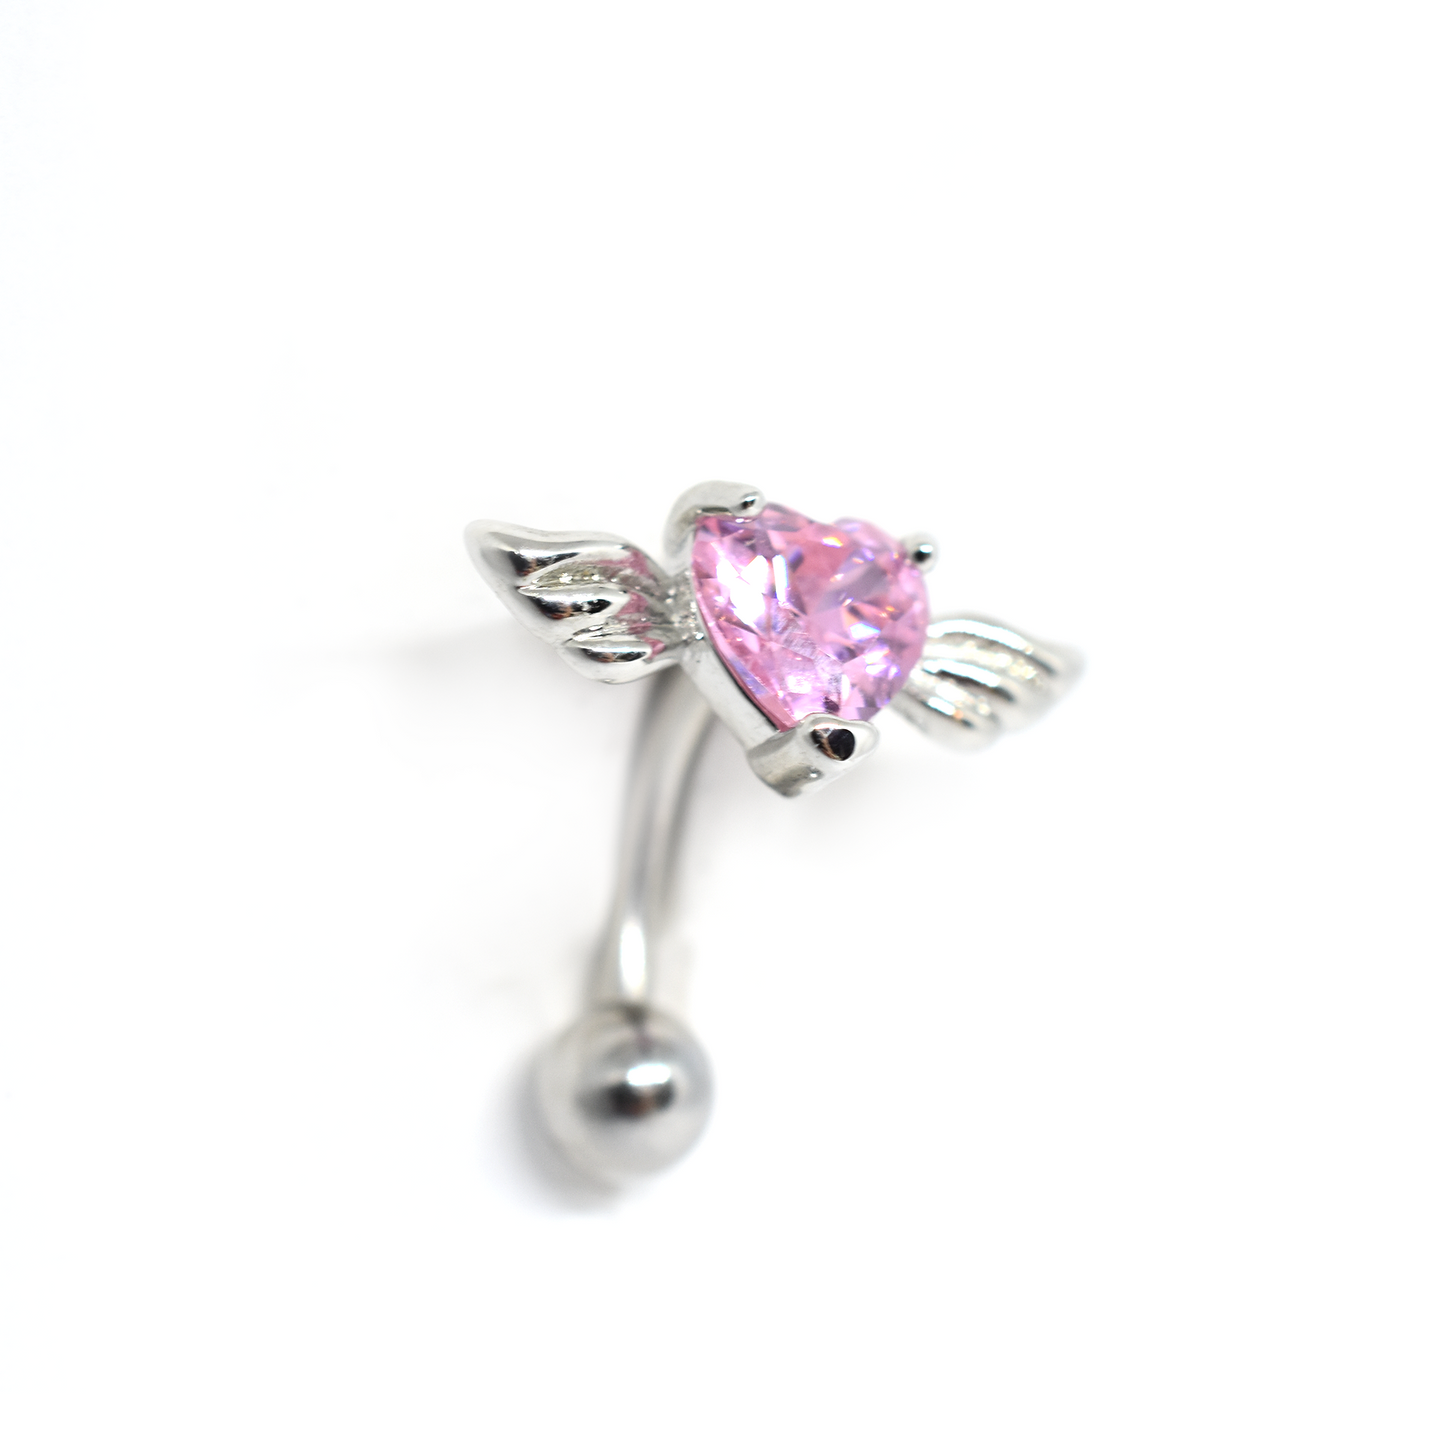 Cupid's Heart Belly Ring